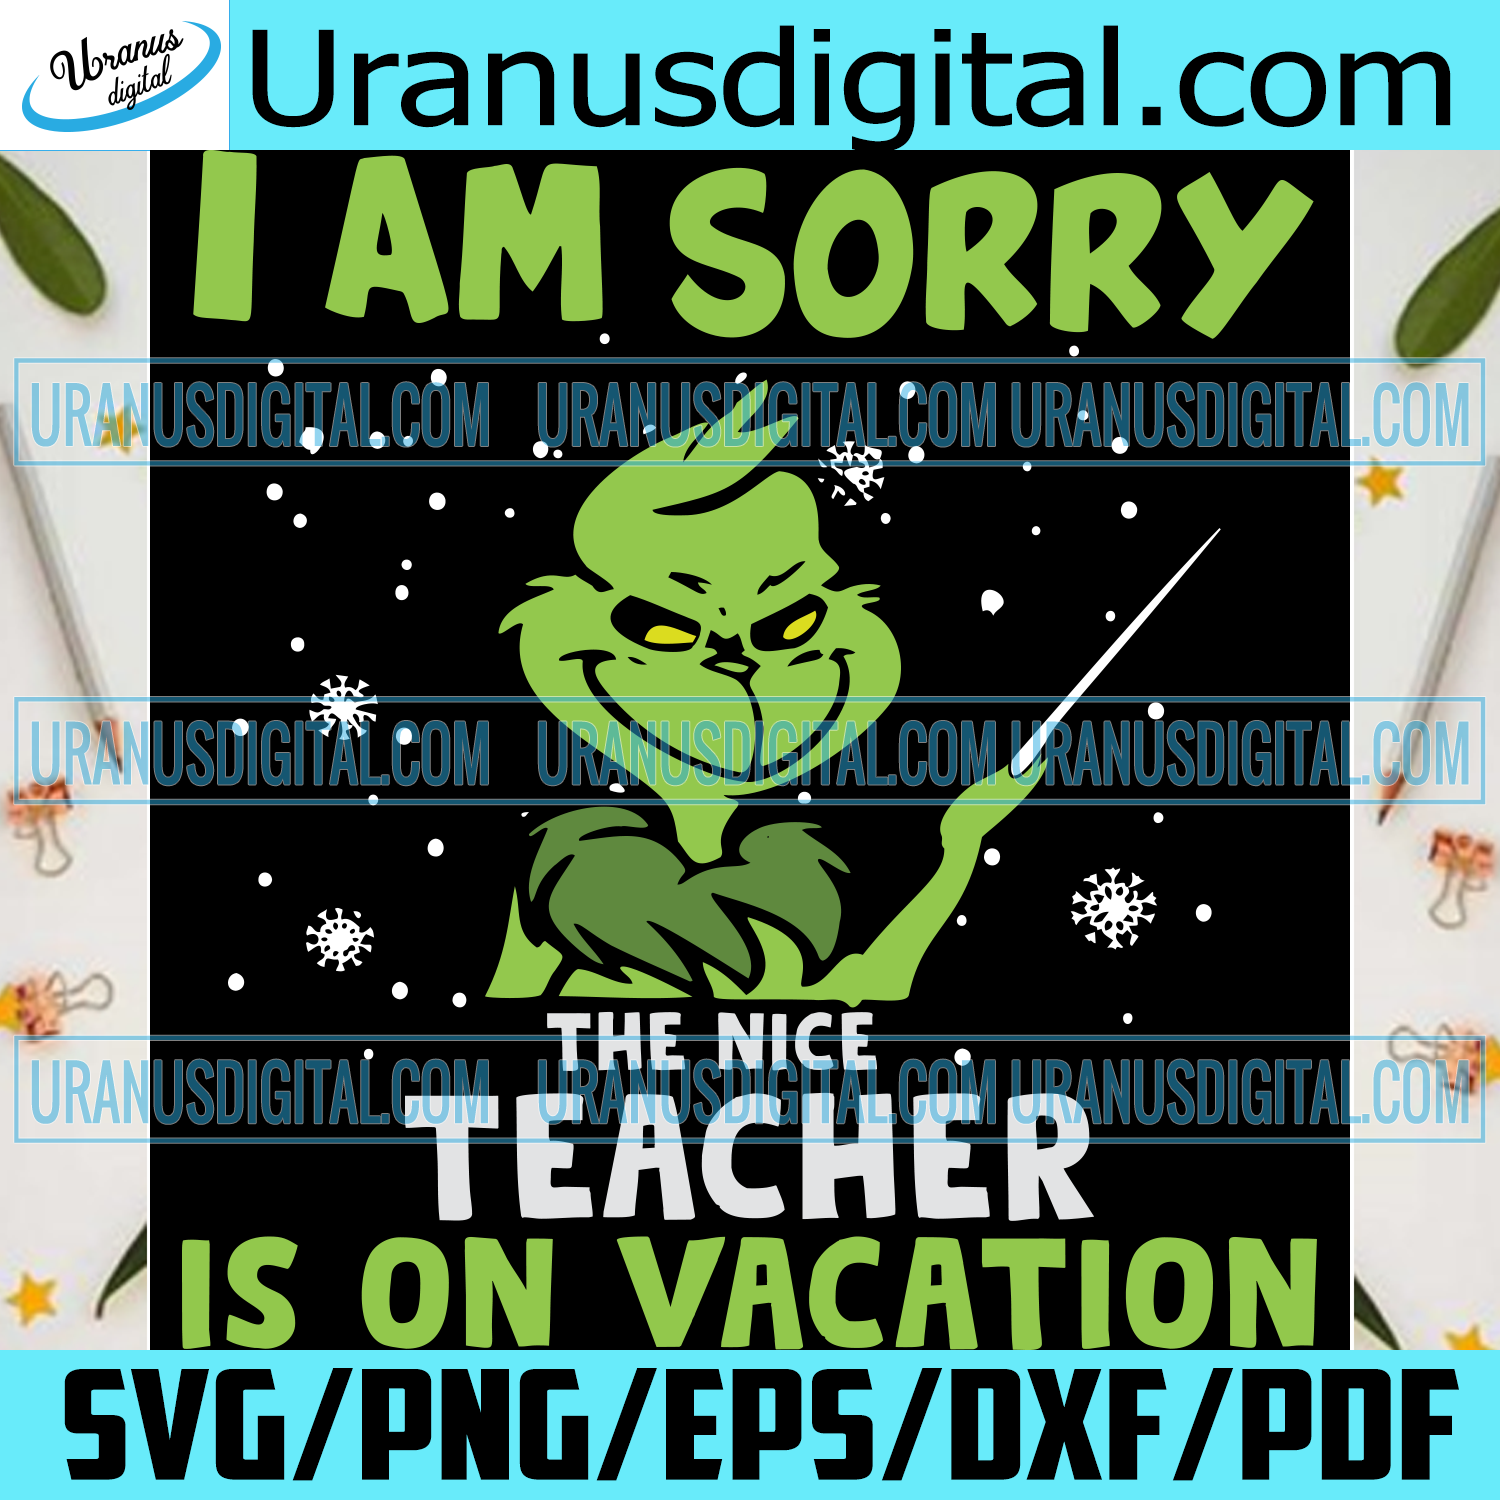 Download I Am Sorry The Nice Teacher Is On Vacation Christmas Svg Grinch Svg Teacher Svg Snow Svg Grinch Teacher Vacation Svg Merry Christmas Christmas Gift Christmas Shirt Grinch Gift Love Grinch Christmas